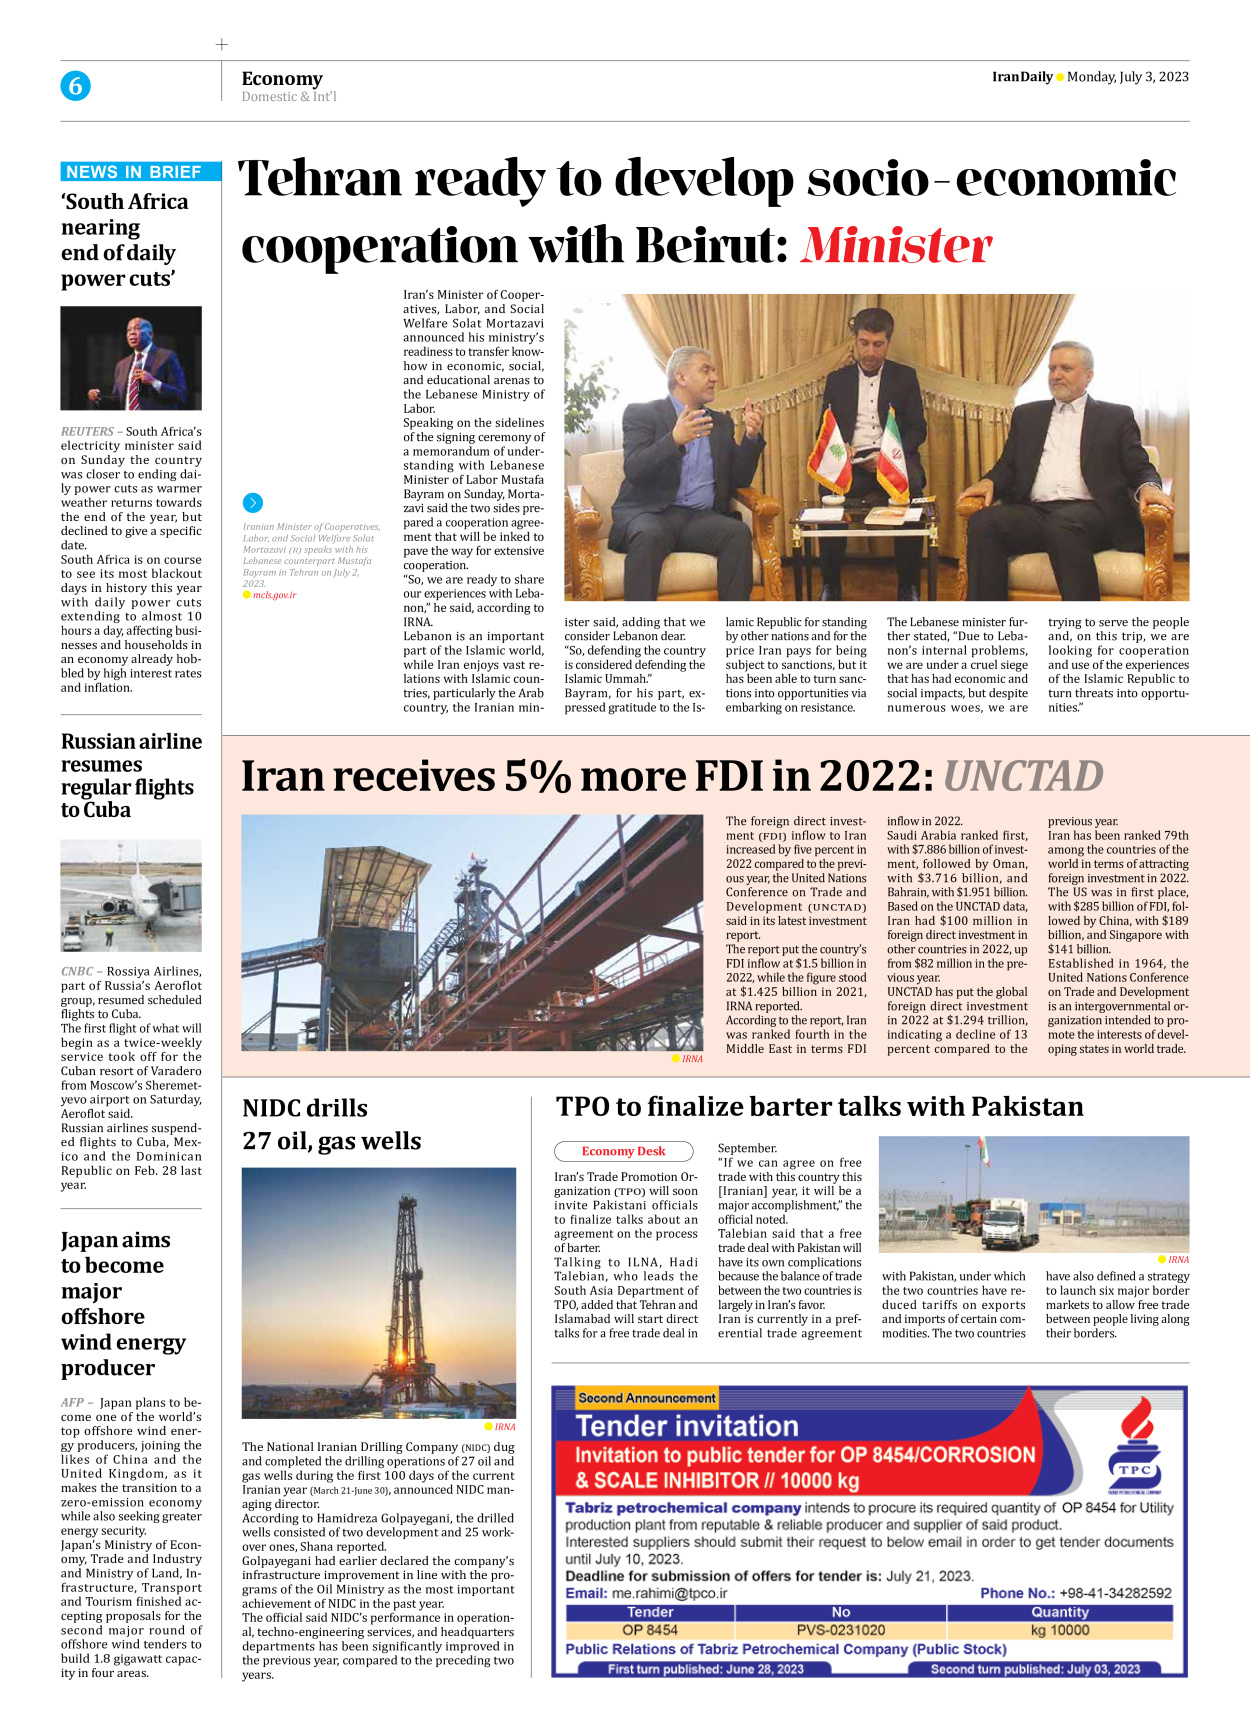 Iran Daily - Number Seven Thousand Three Hundred and Twenty Nine - 03 July 2023 - Page 6